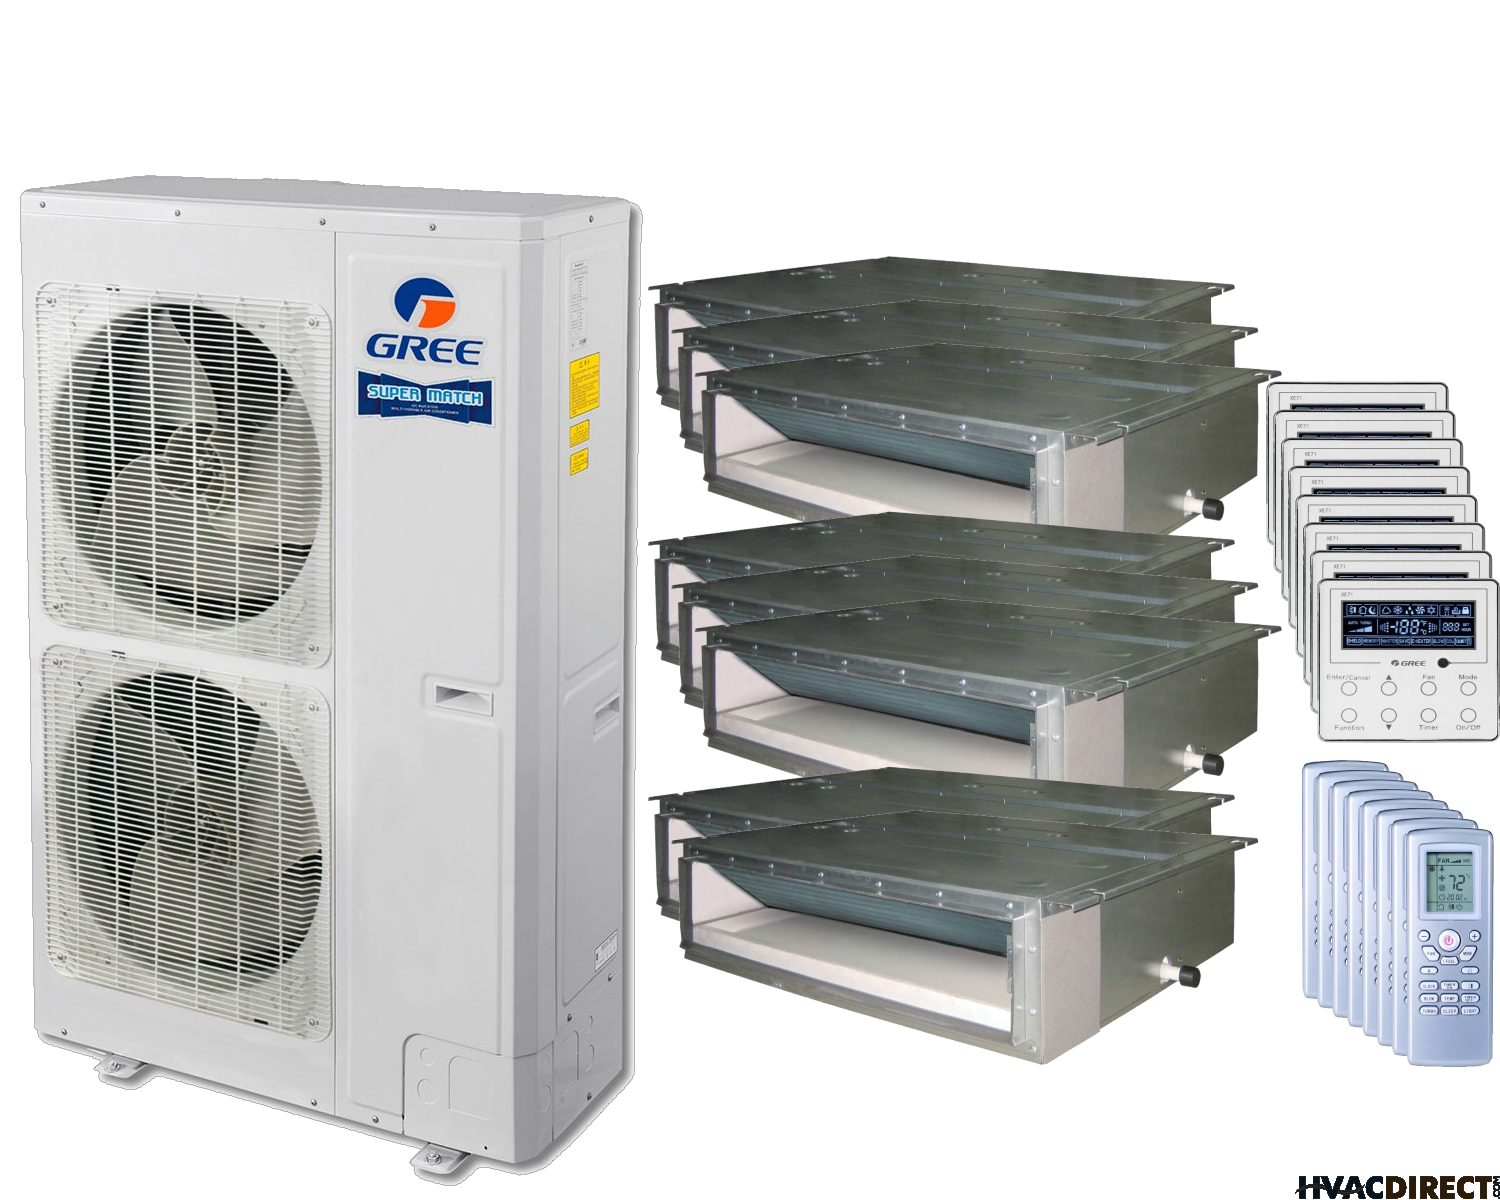 56,000 BTU 15 SEER Eight Zone Concealed Duct Gree Heat Pump System 9+9+9+9+9+9+9+18